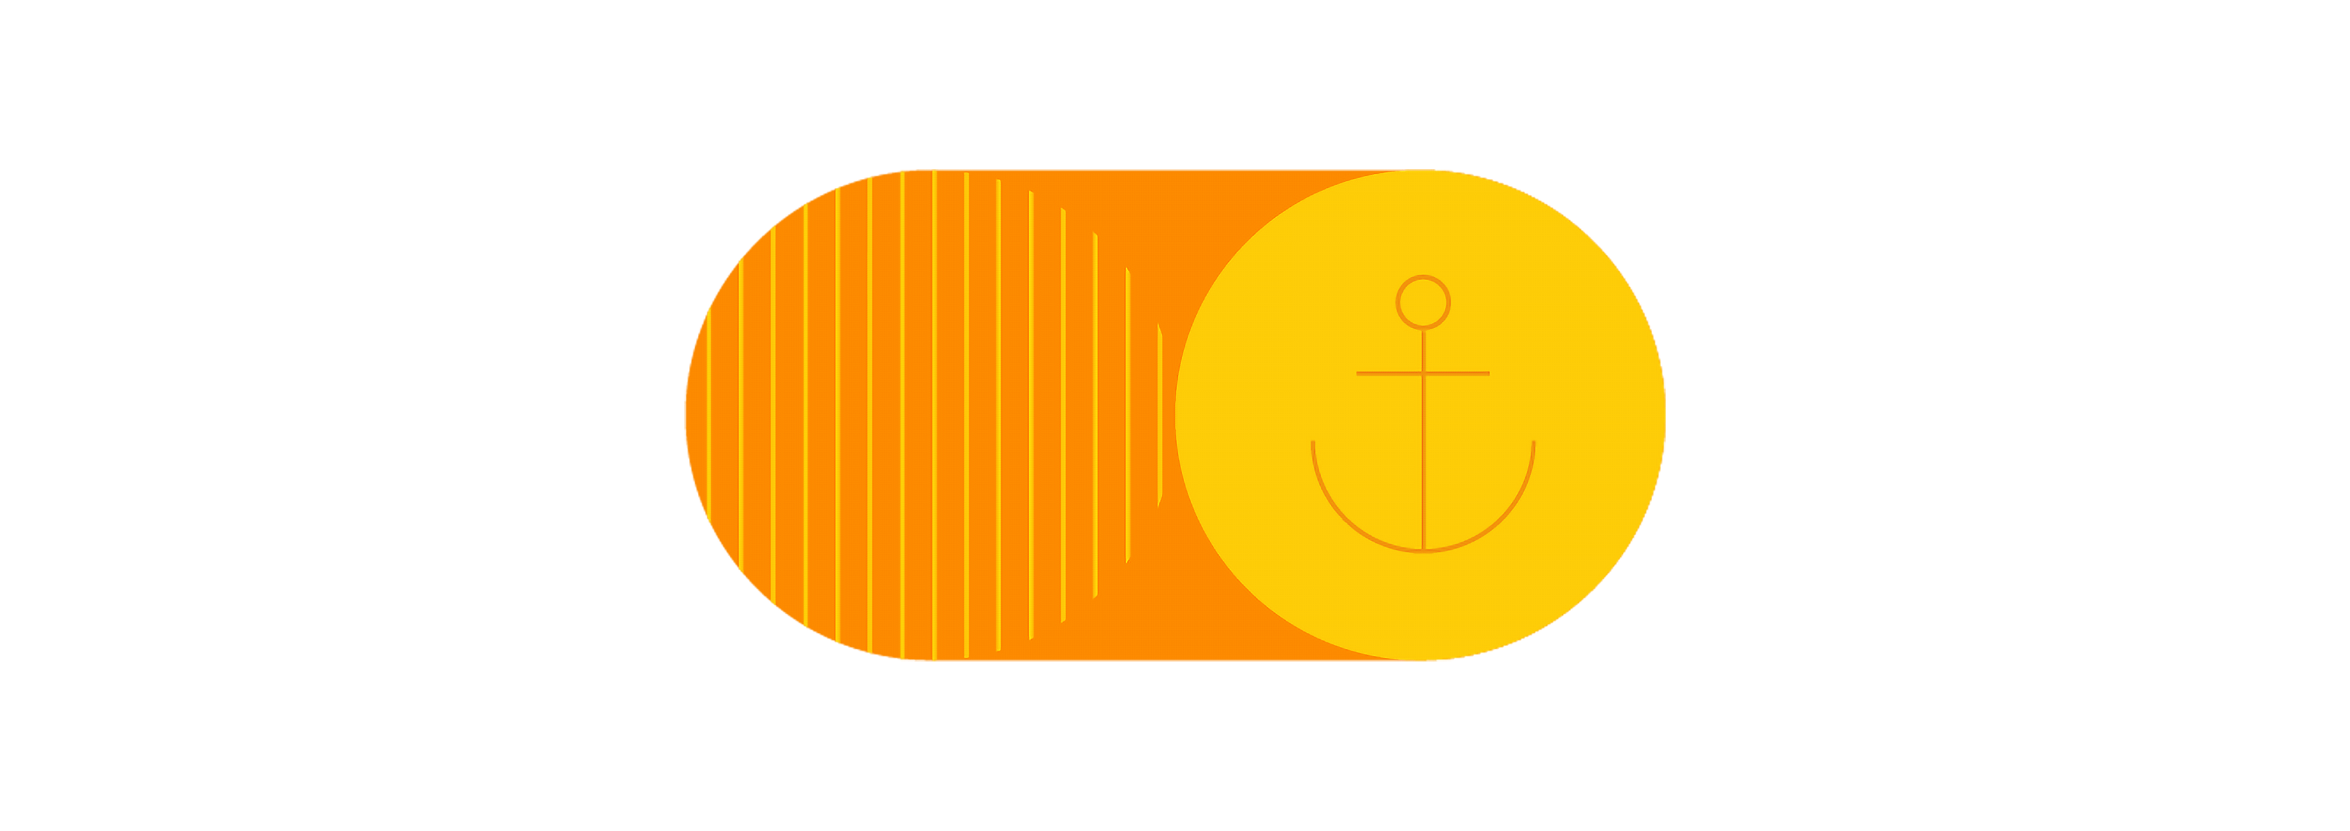 Yellow and orange patterns and symbols against a white background.